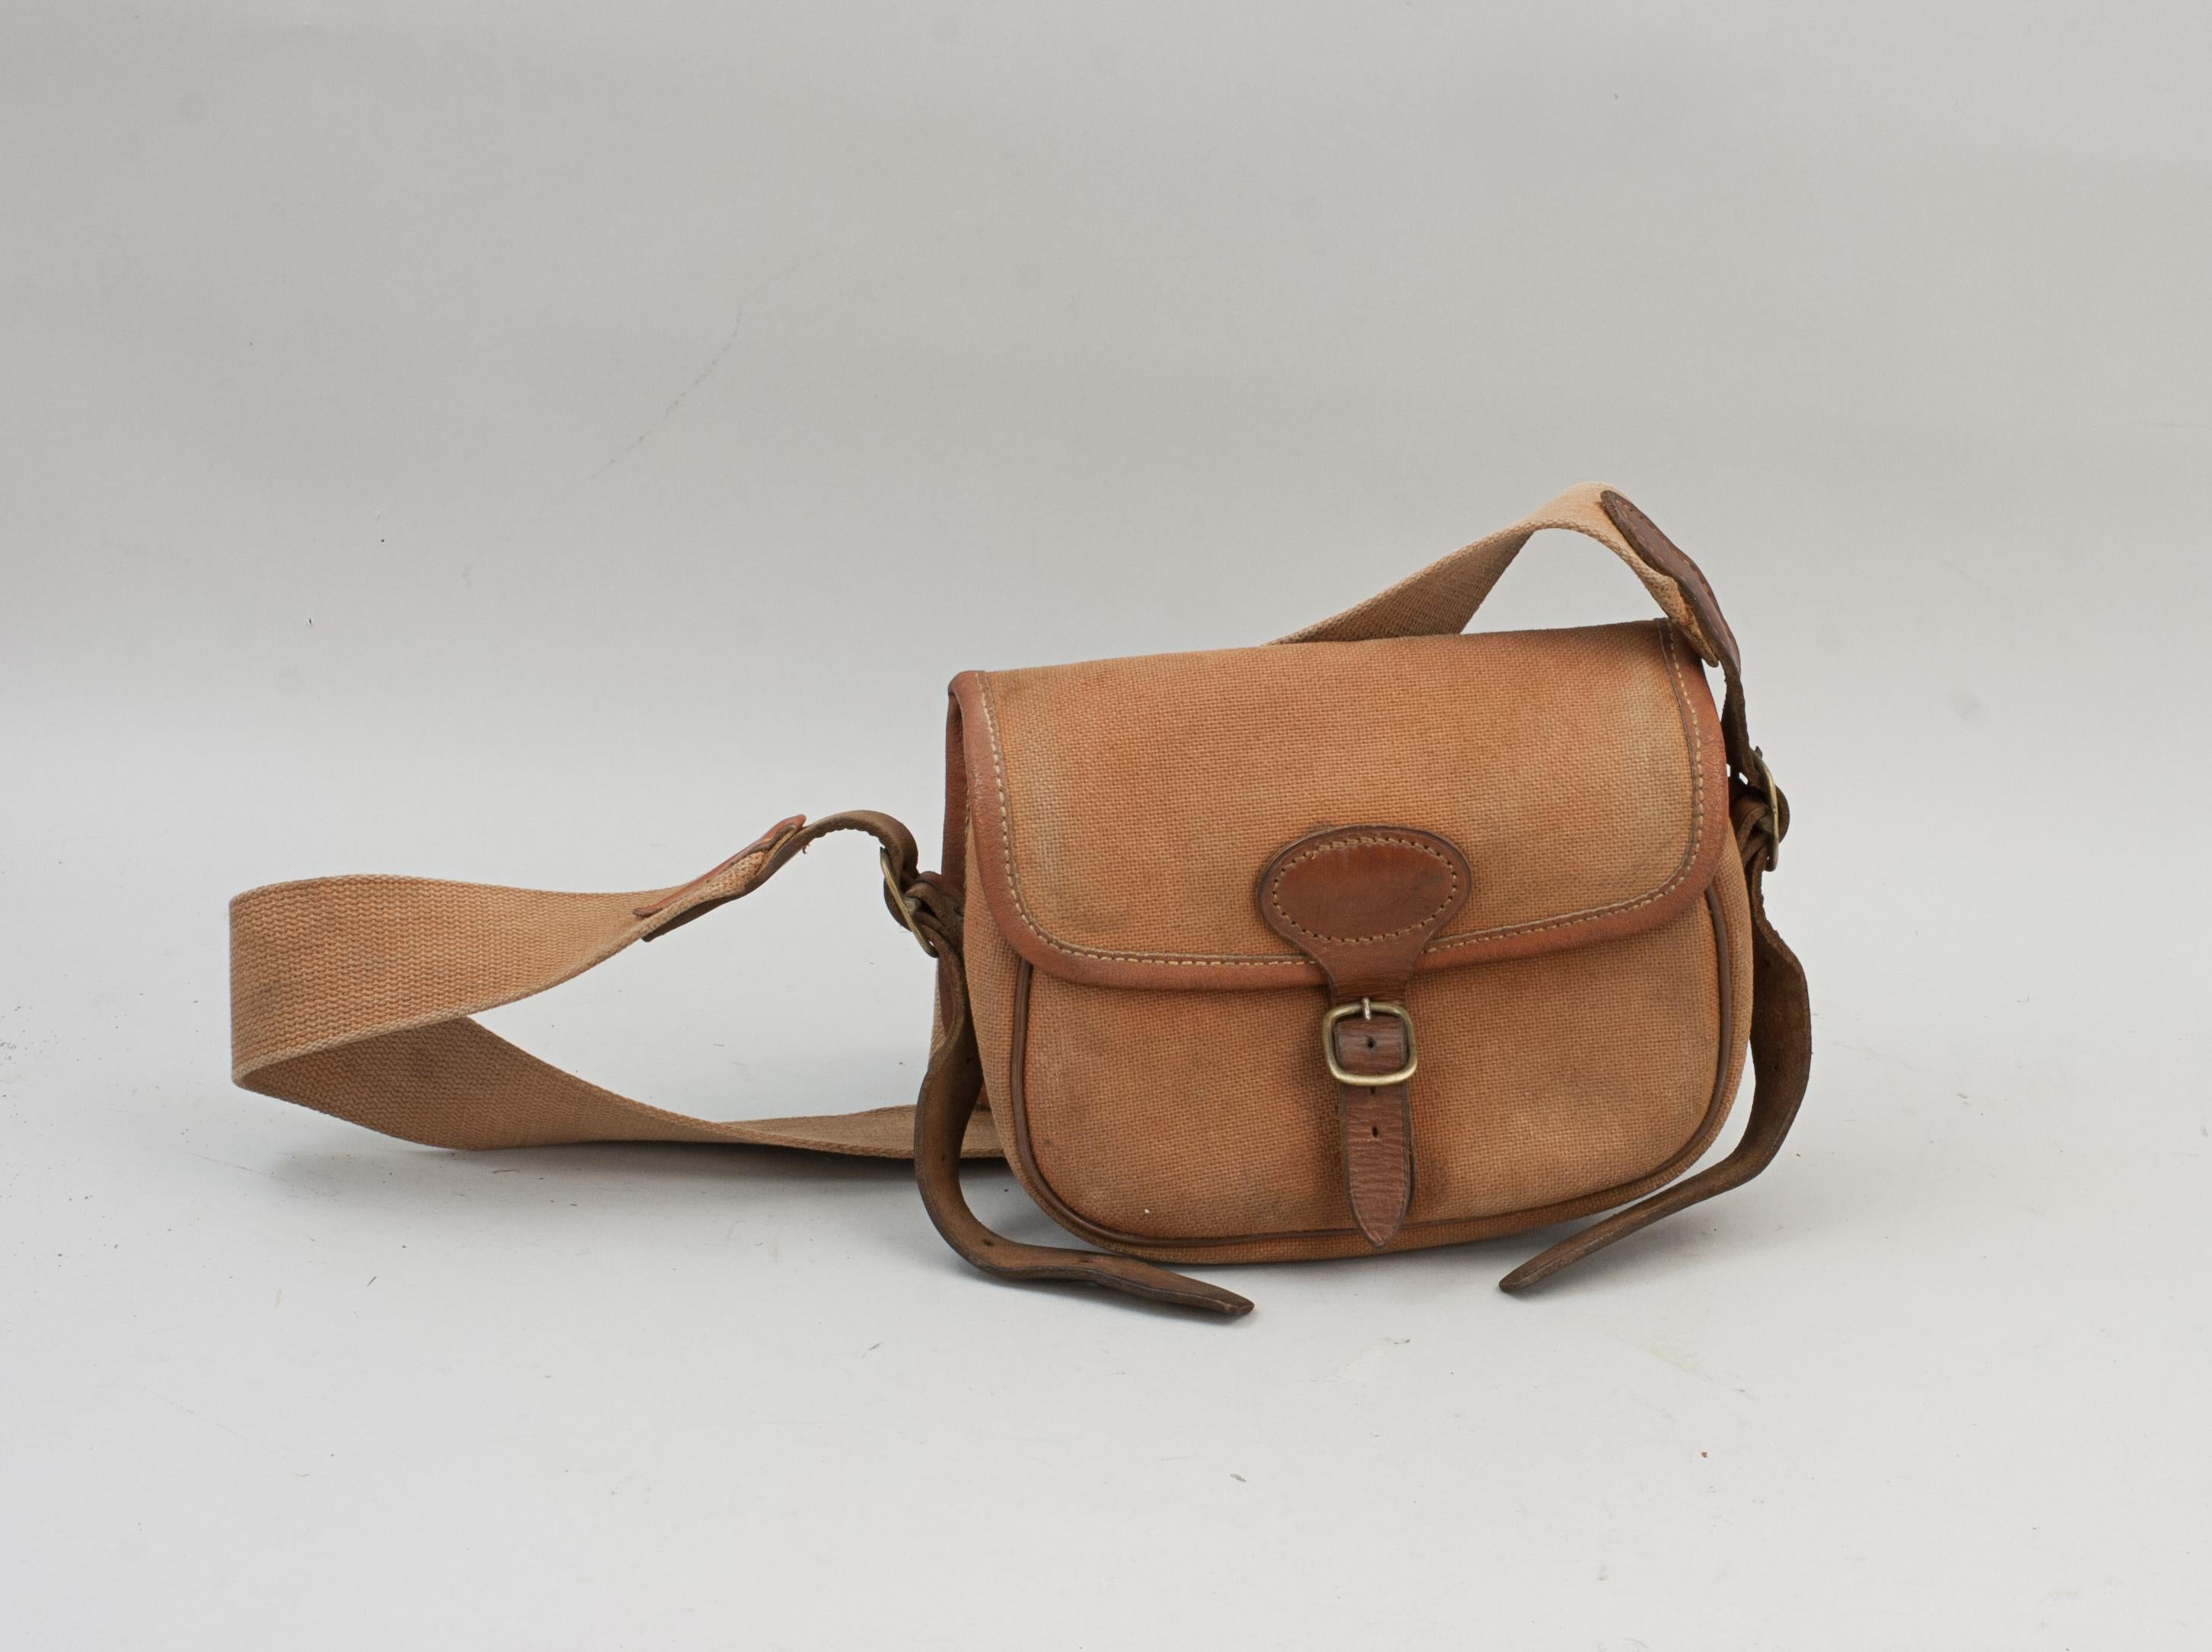 Vintage canvas brady cartridge bag.
A good quality small 'Brady' canvas cartridge bag by Brady, Halesowen. The bag is in good usable condition with brass fittings, leather trim and a cotton web adjustable shoulder strap. The bag has the cloth Brady